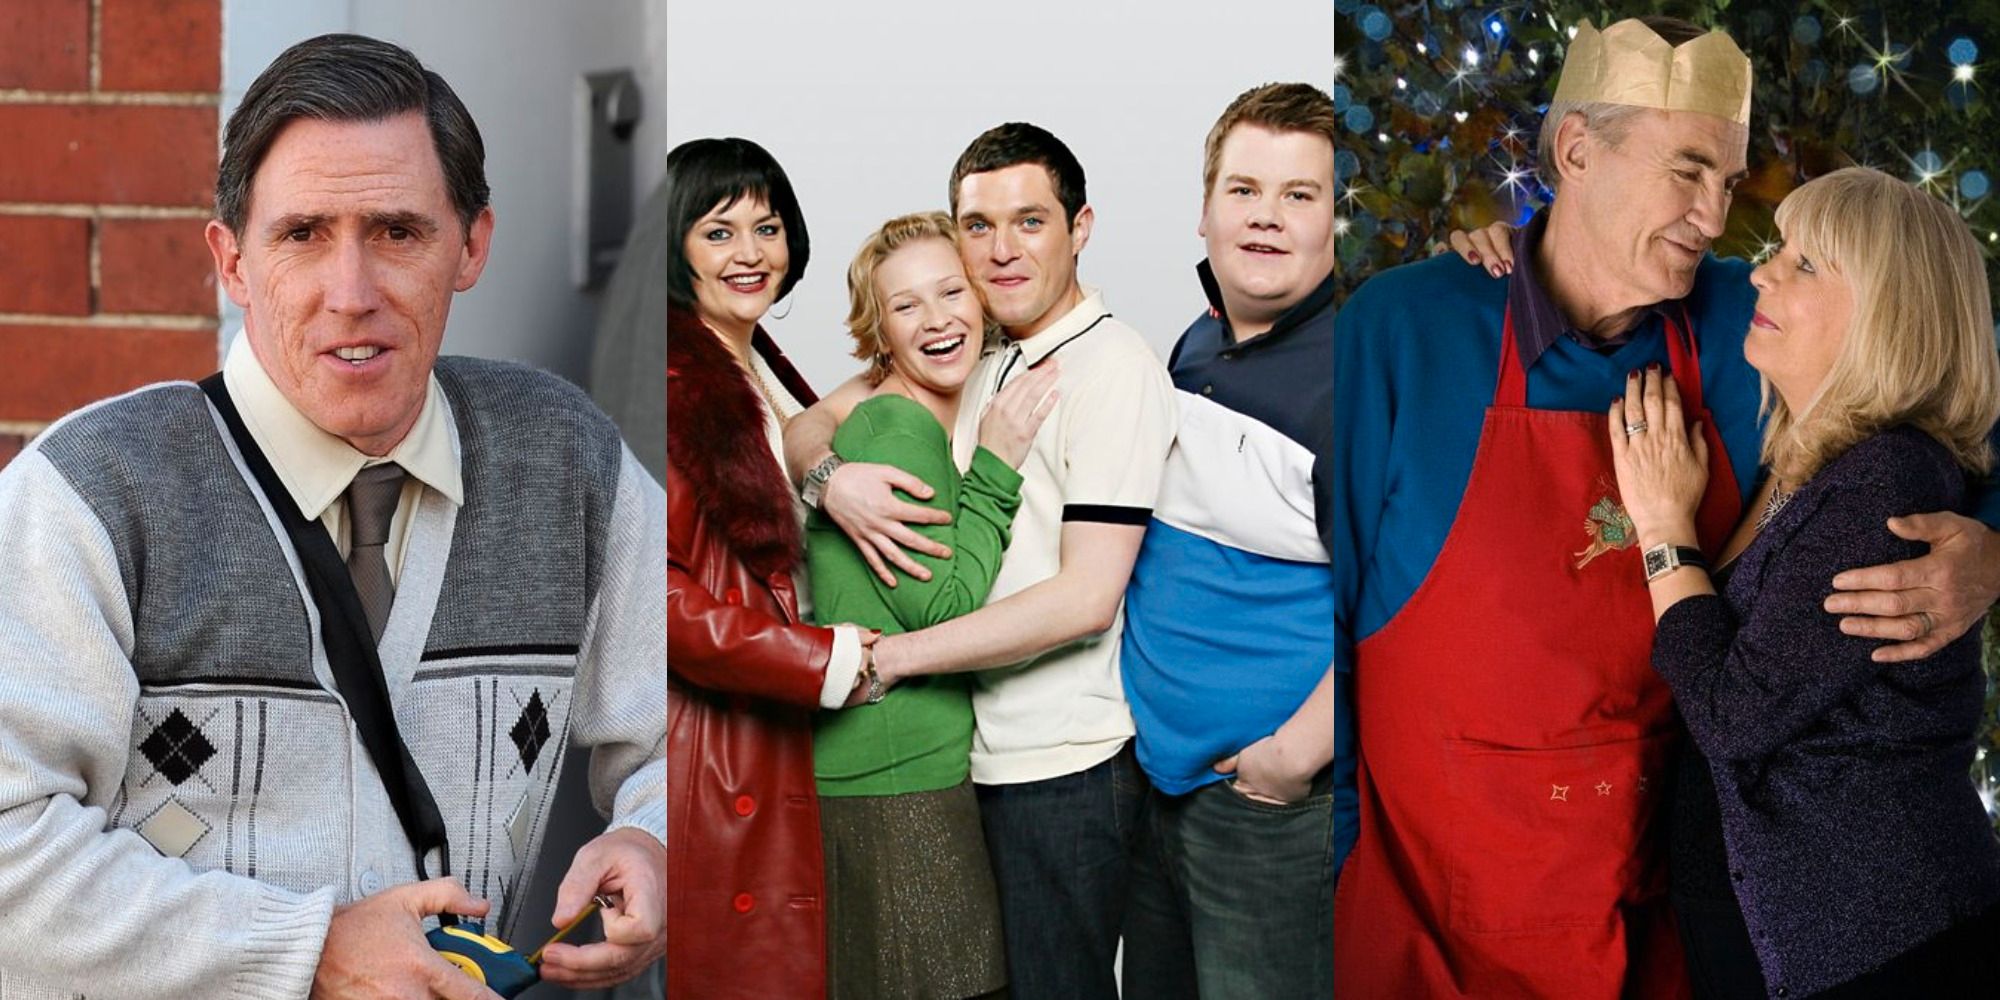 Gavin & Stacey: The Main Characters, Ranked By Likability